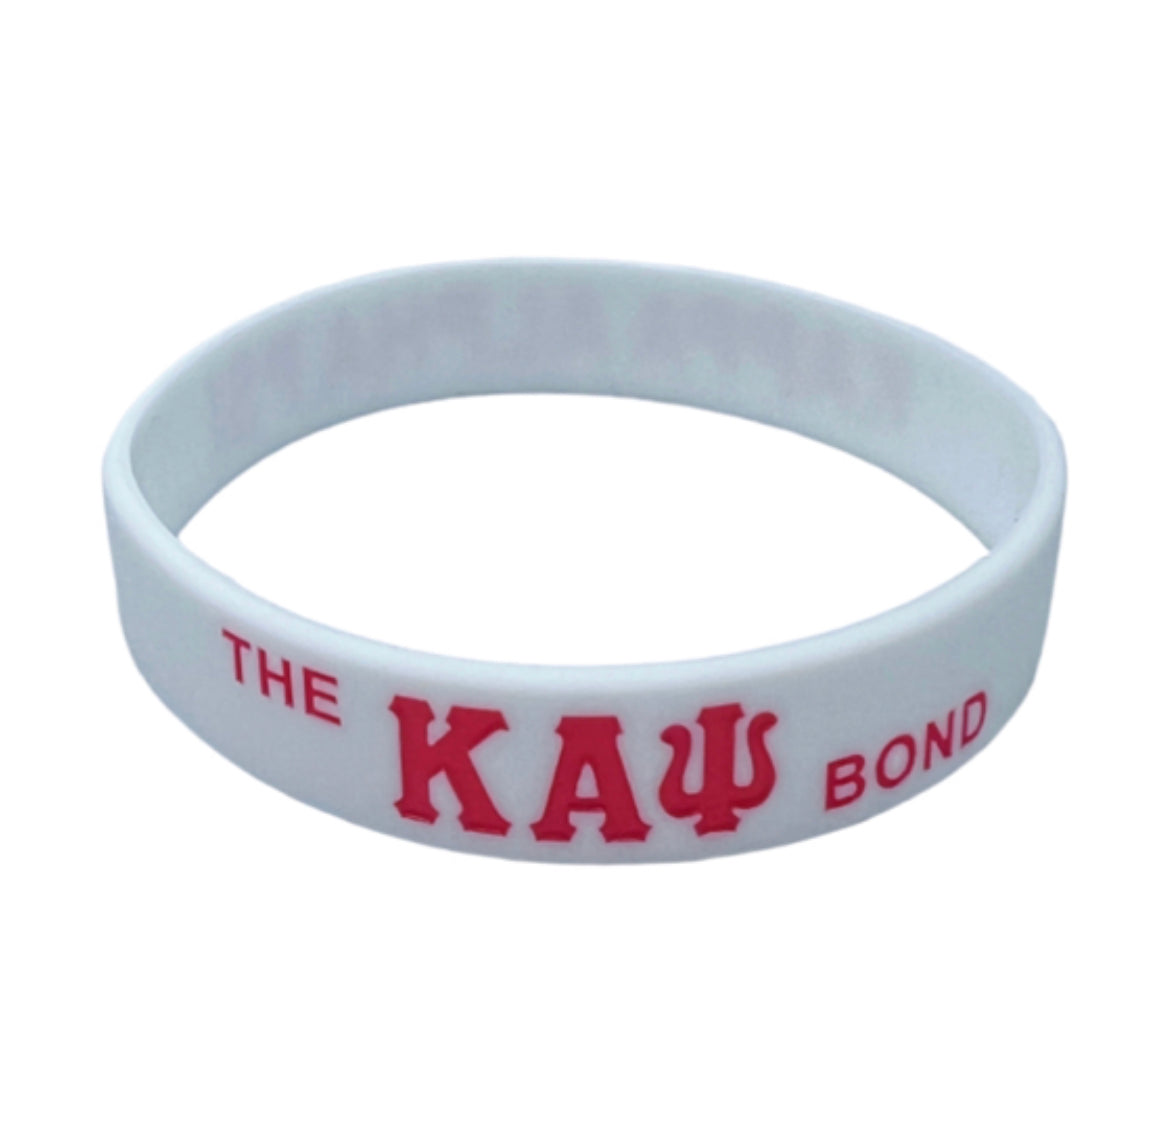 Show your pride for Kappa Alpha Psi with this "THE BOND" silicone band. Perfect for fraternity members, this collectible is a must-have for any historical memorabilia or fraternal organization enthusiast. The bold design features the iconic Kappa Alpha Psi emblem, making it a great addition to any jewelry collection. Made of high-quality silicone, this band is durable and suitable for everyday wear.